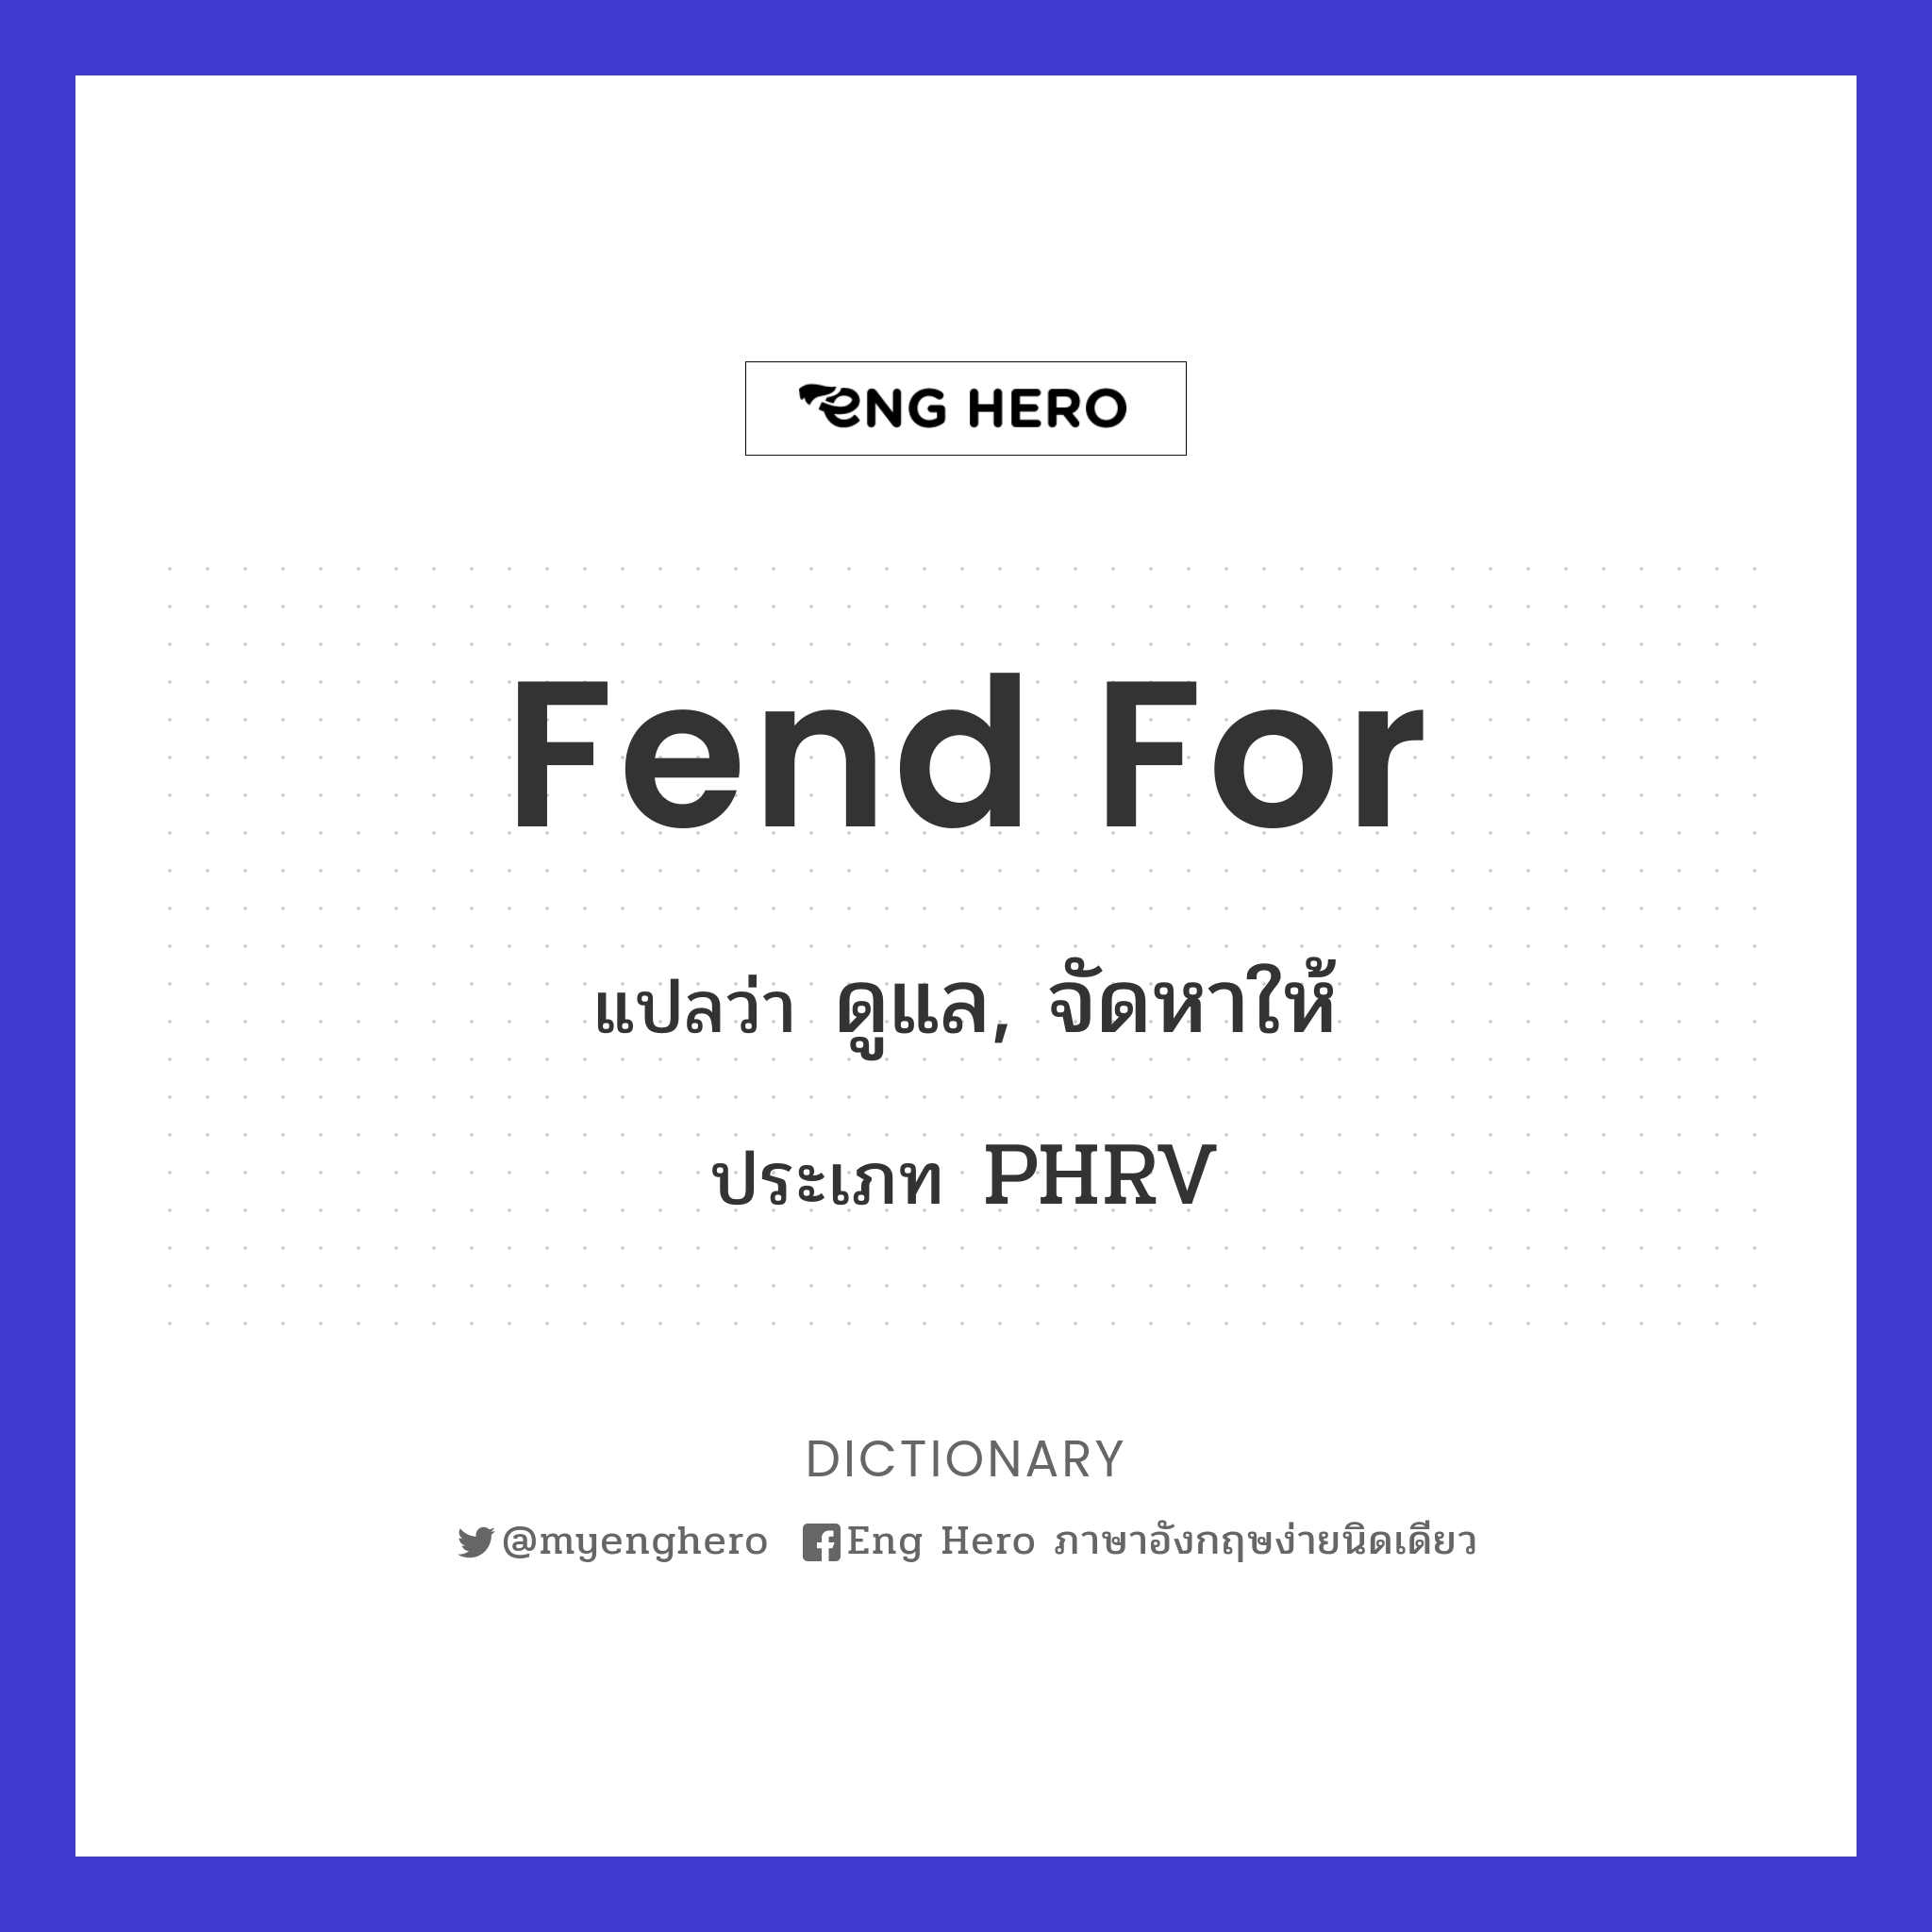 fend for